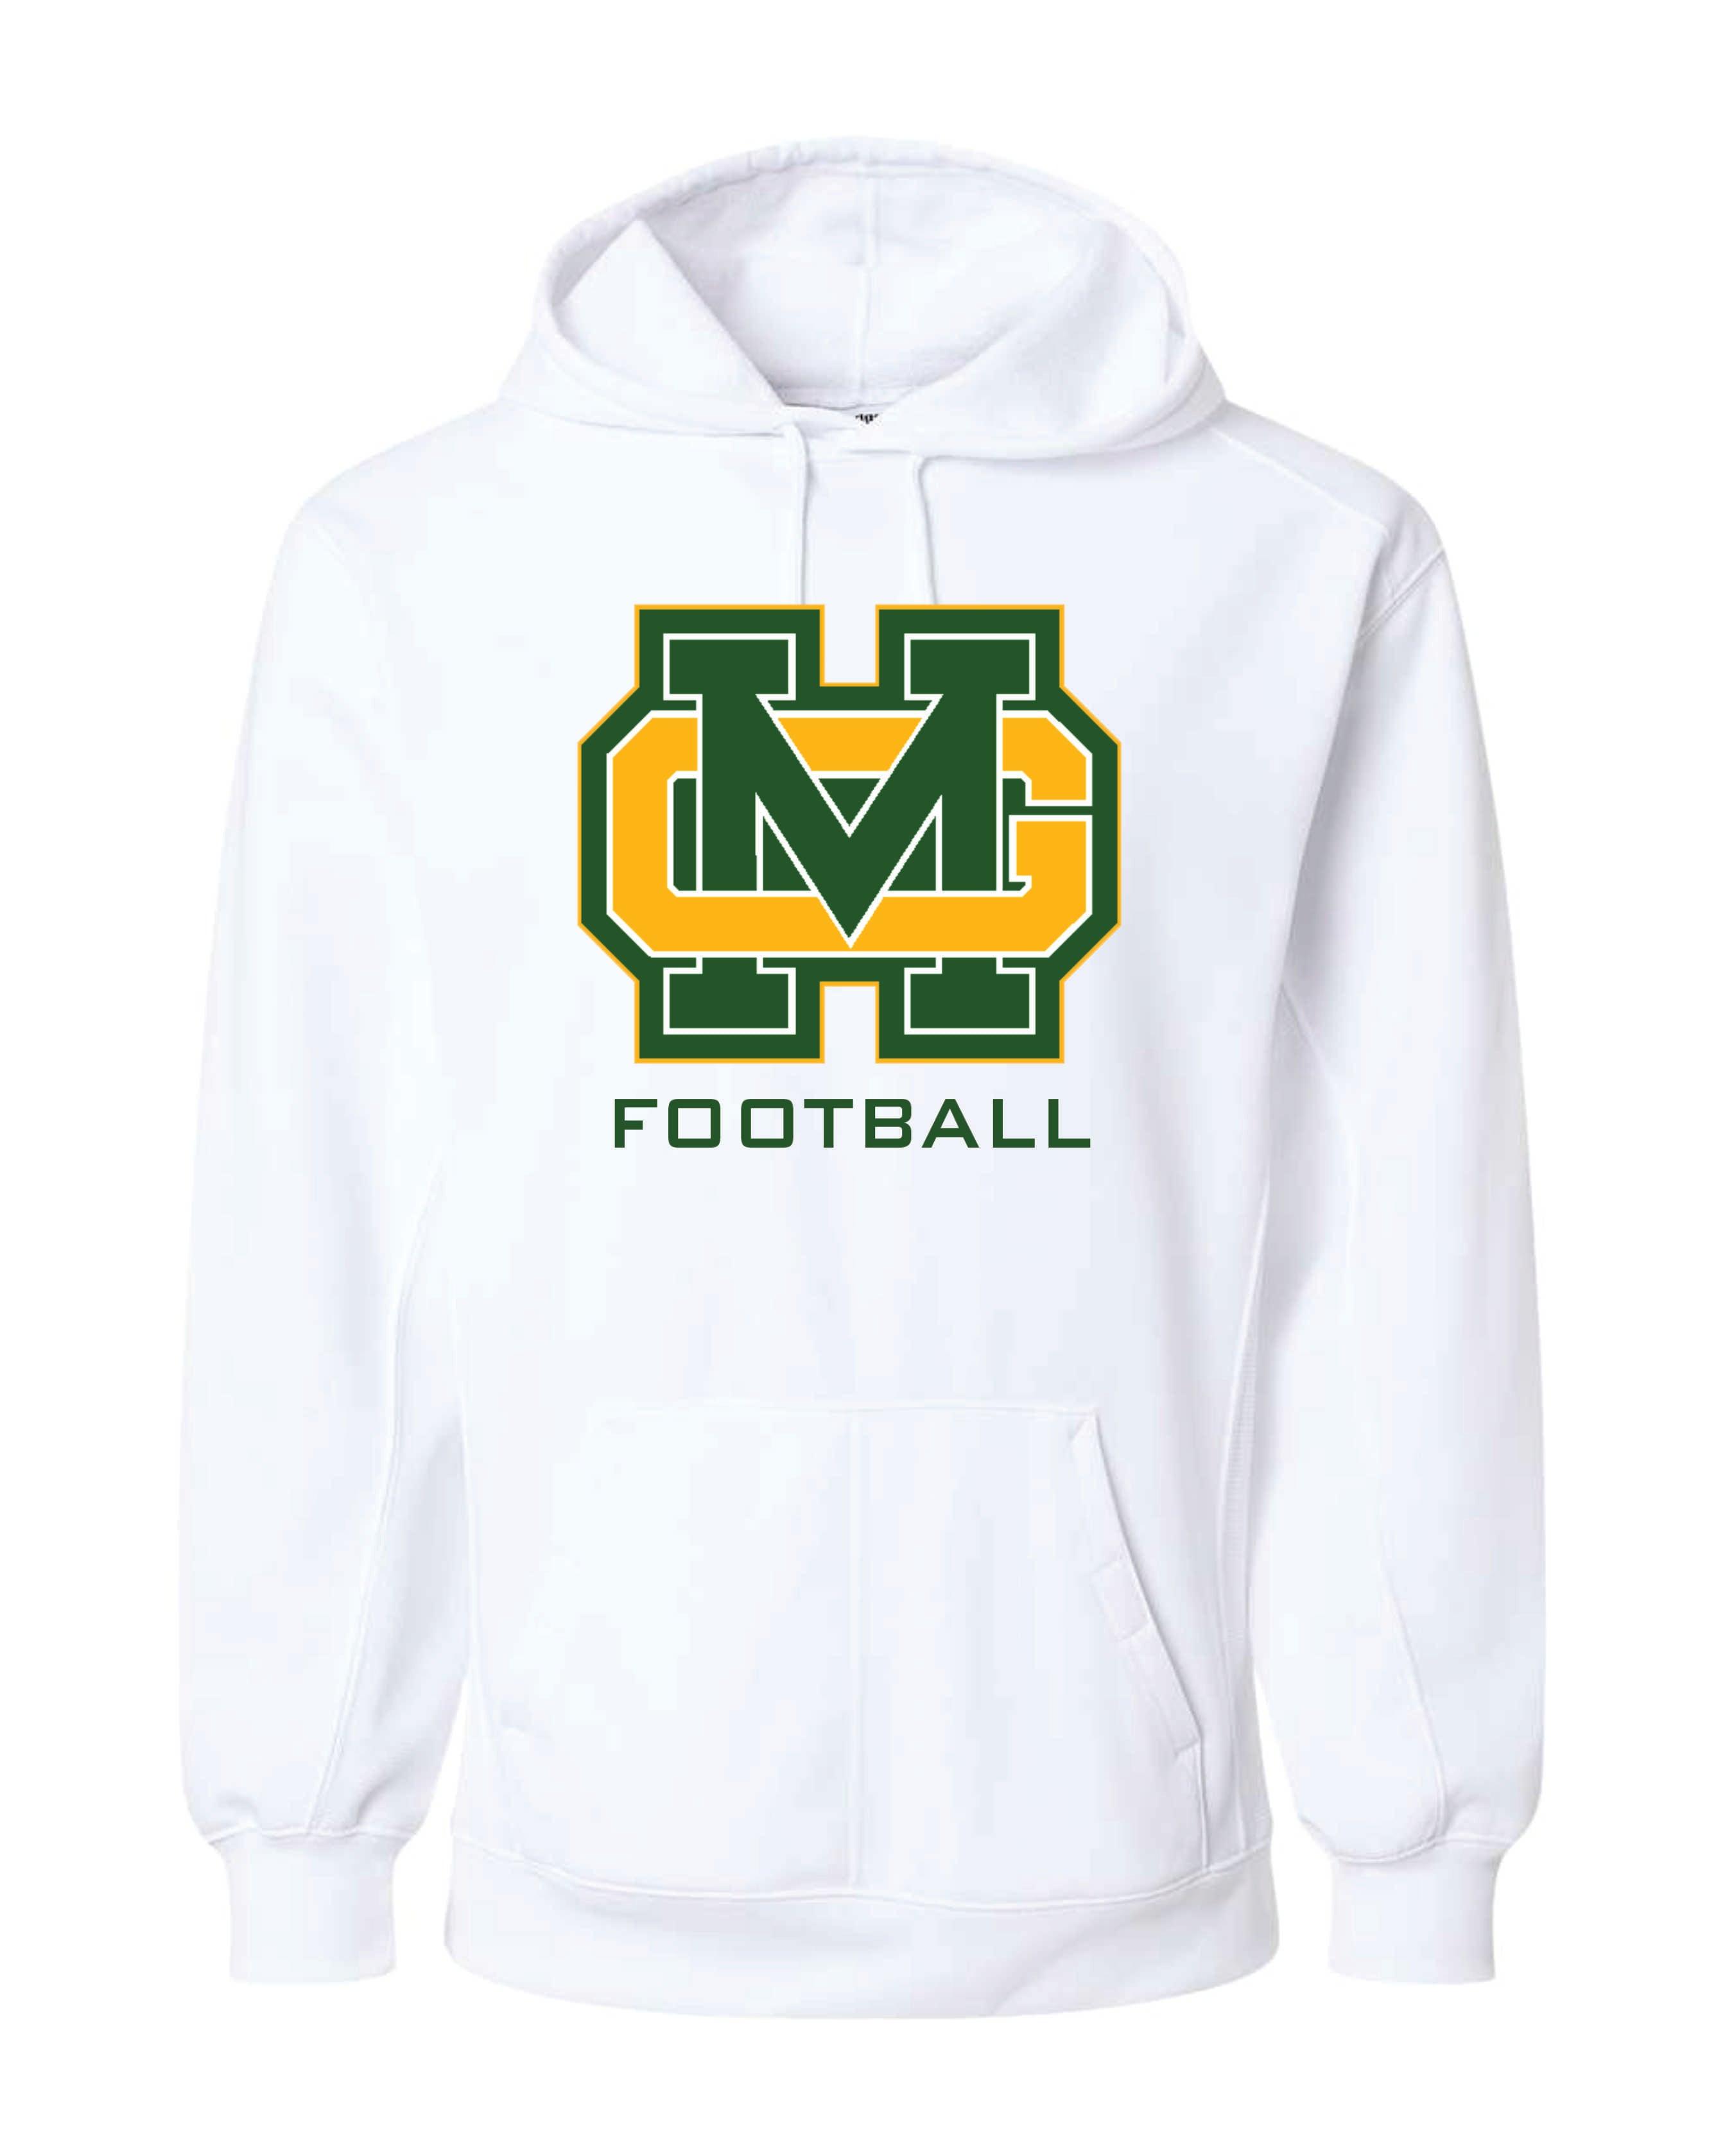 Great Mills Football Badger Dri-fit Hoodie - YOUTH